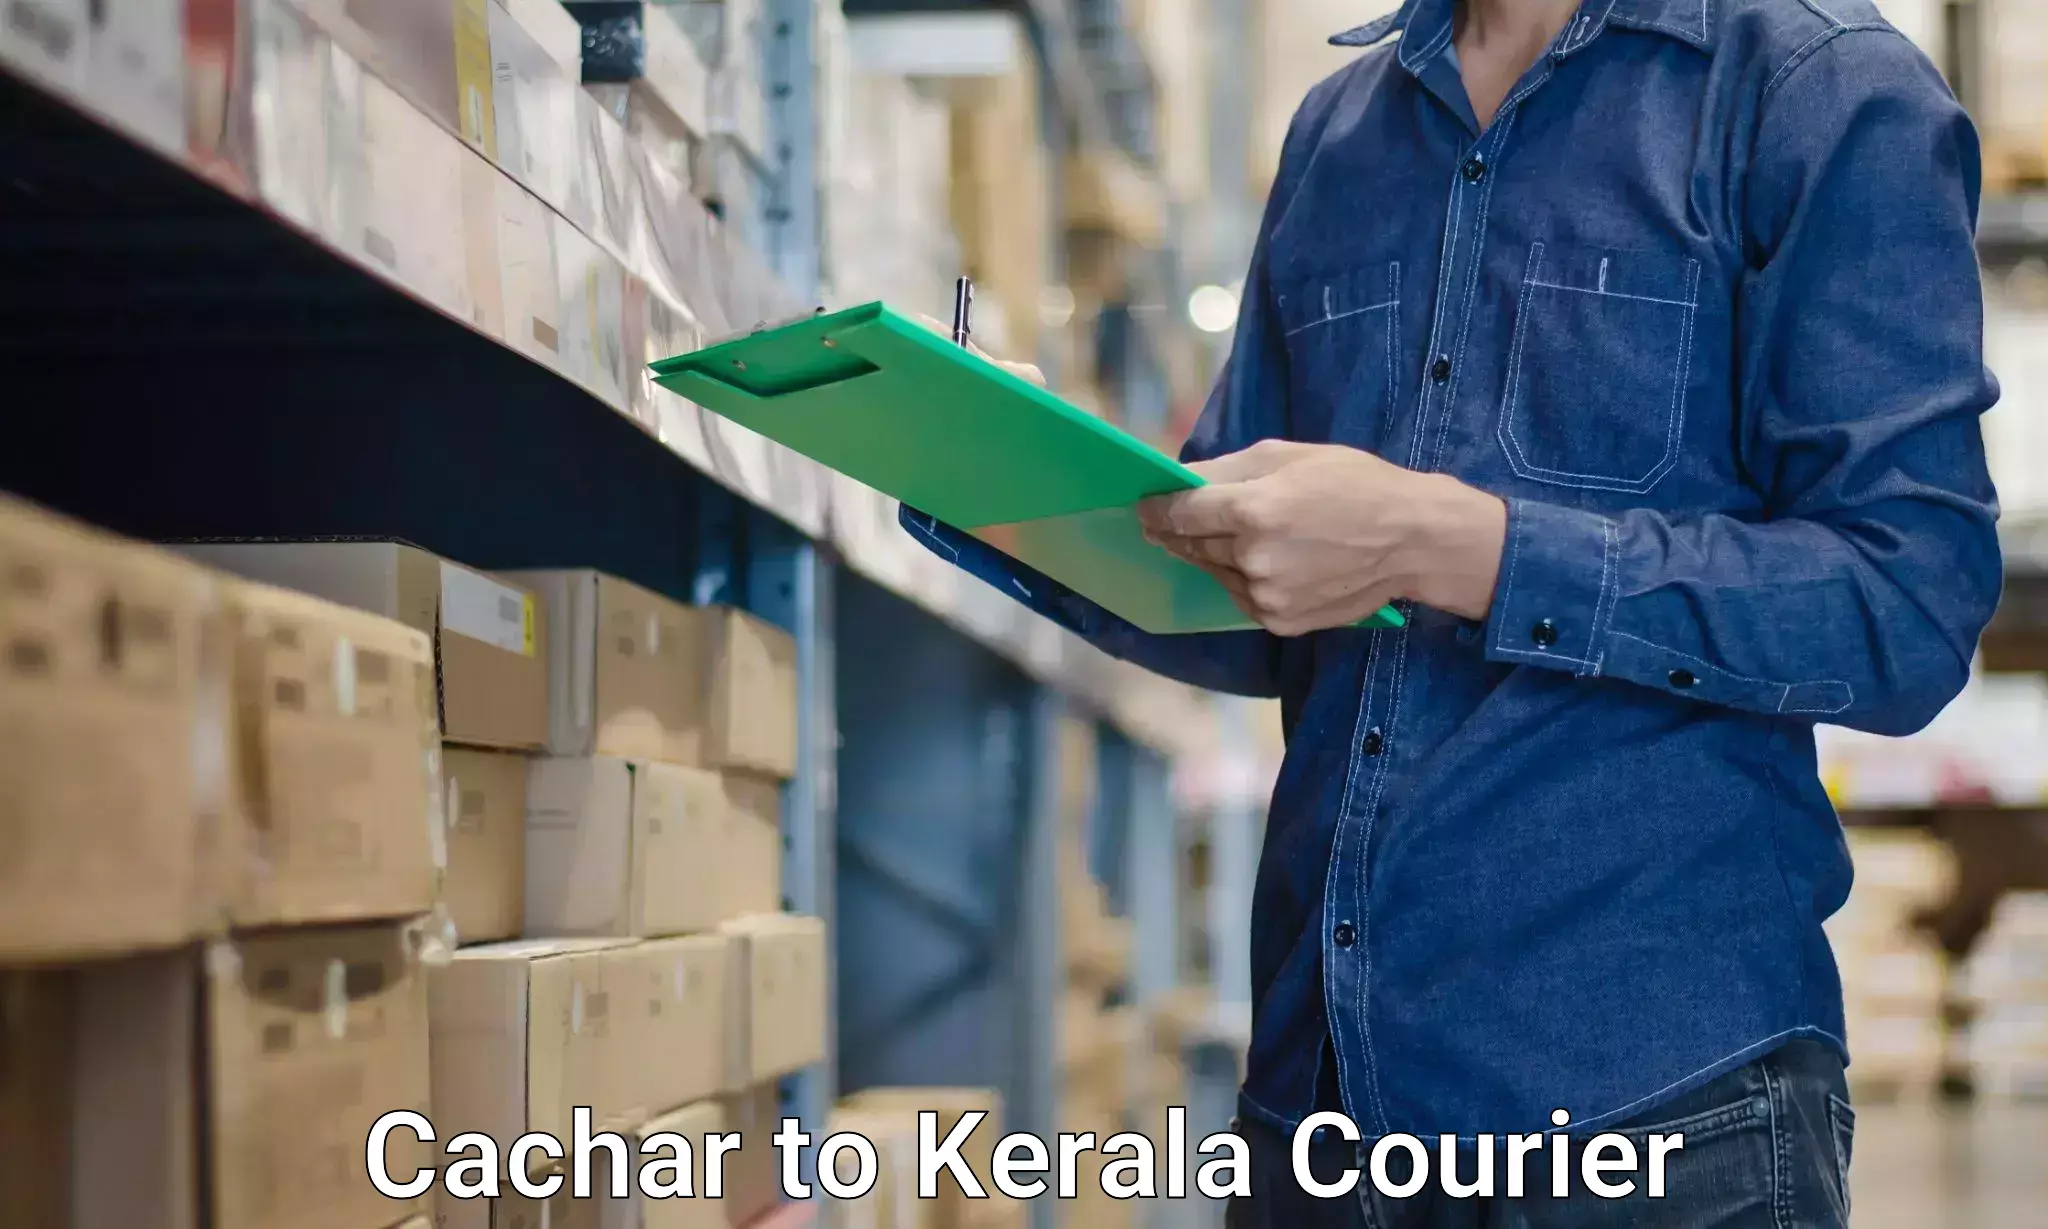 Professional packing services Cachar to Trivandrum